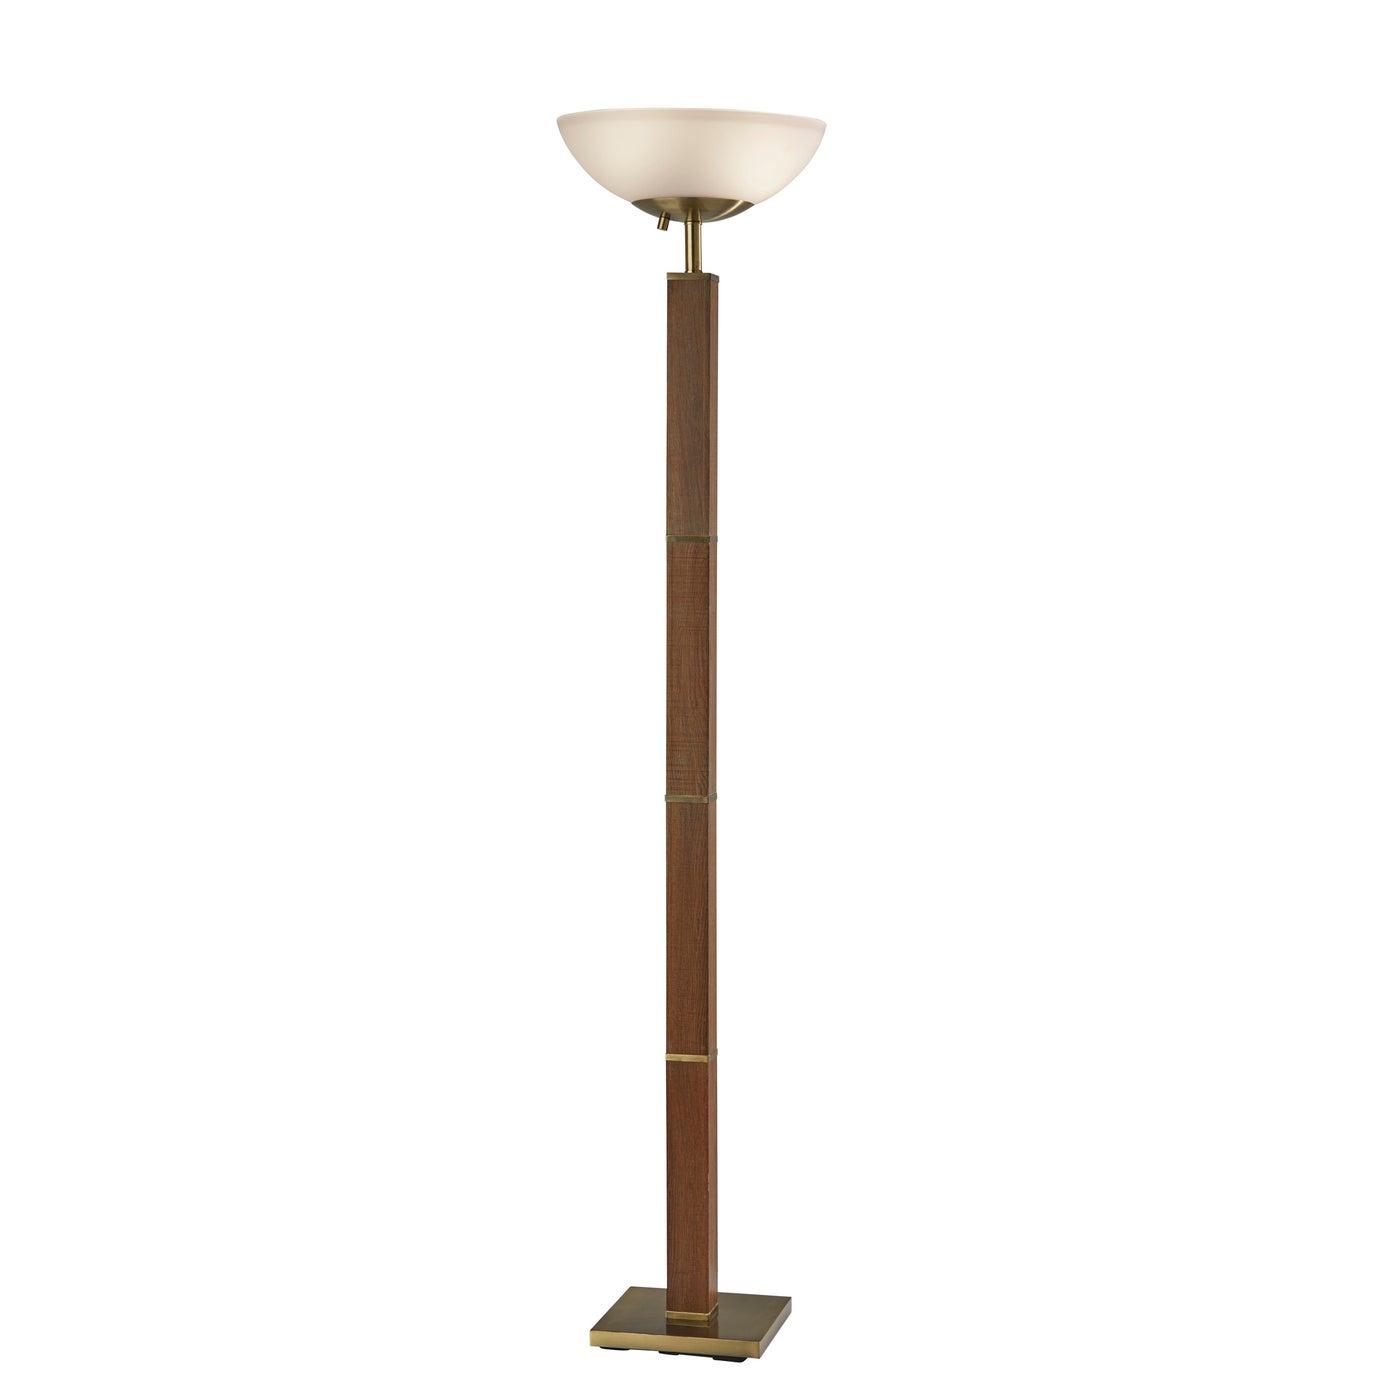 Adesso Home - 3499-21 - Two Light Torchiere - Kona - Antique Brass